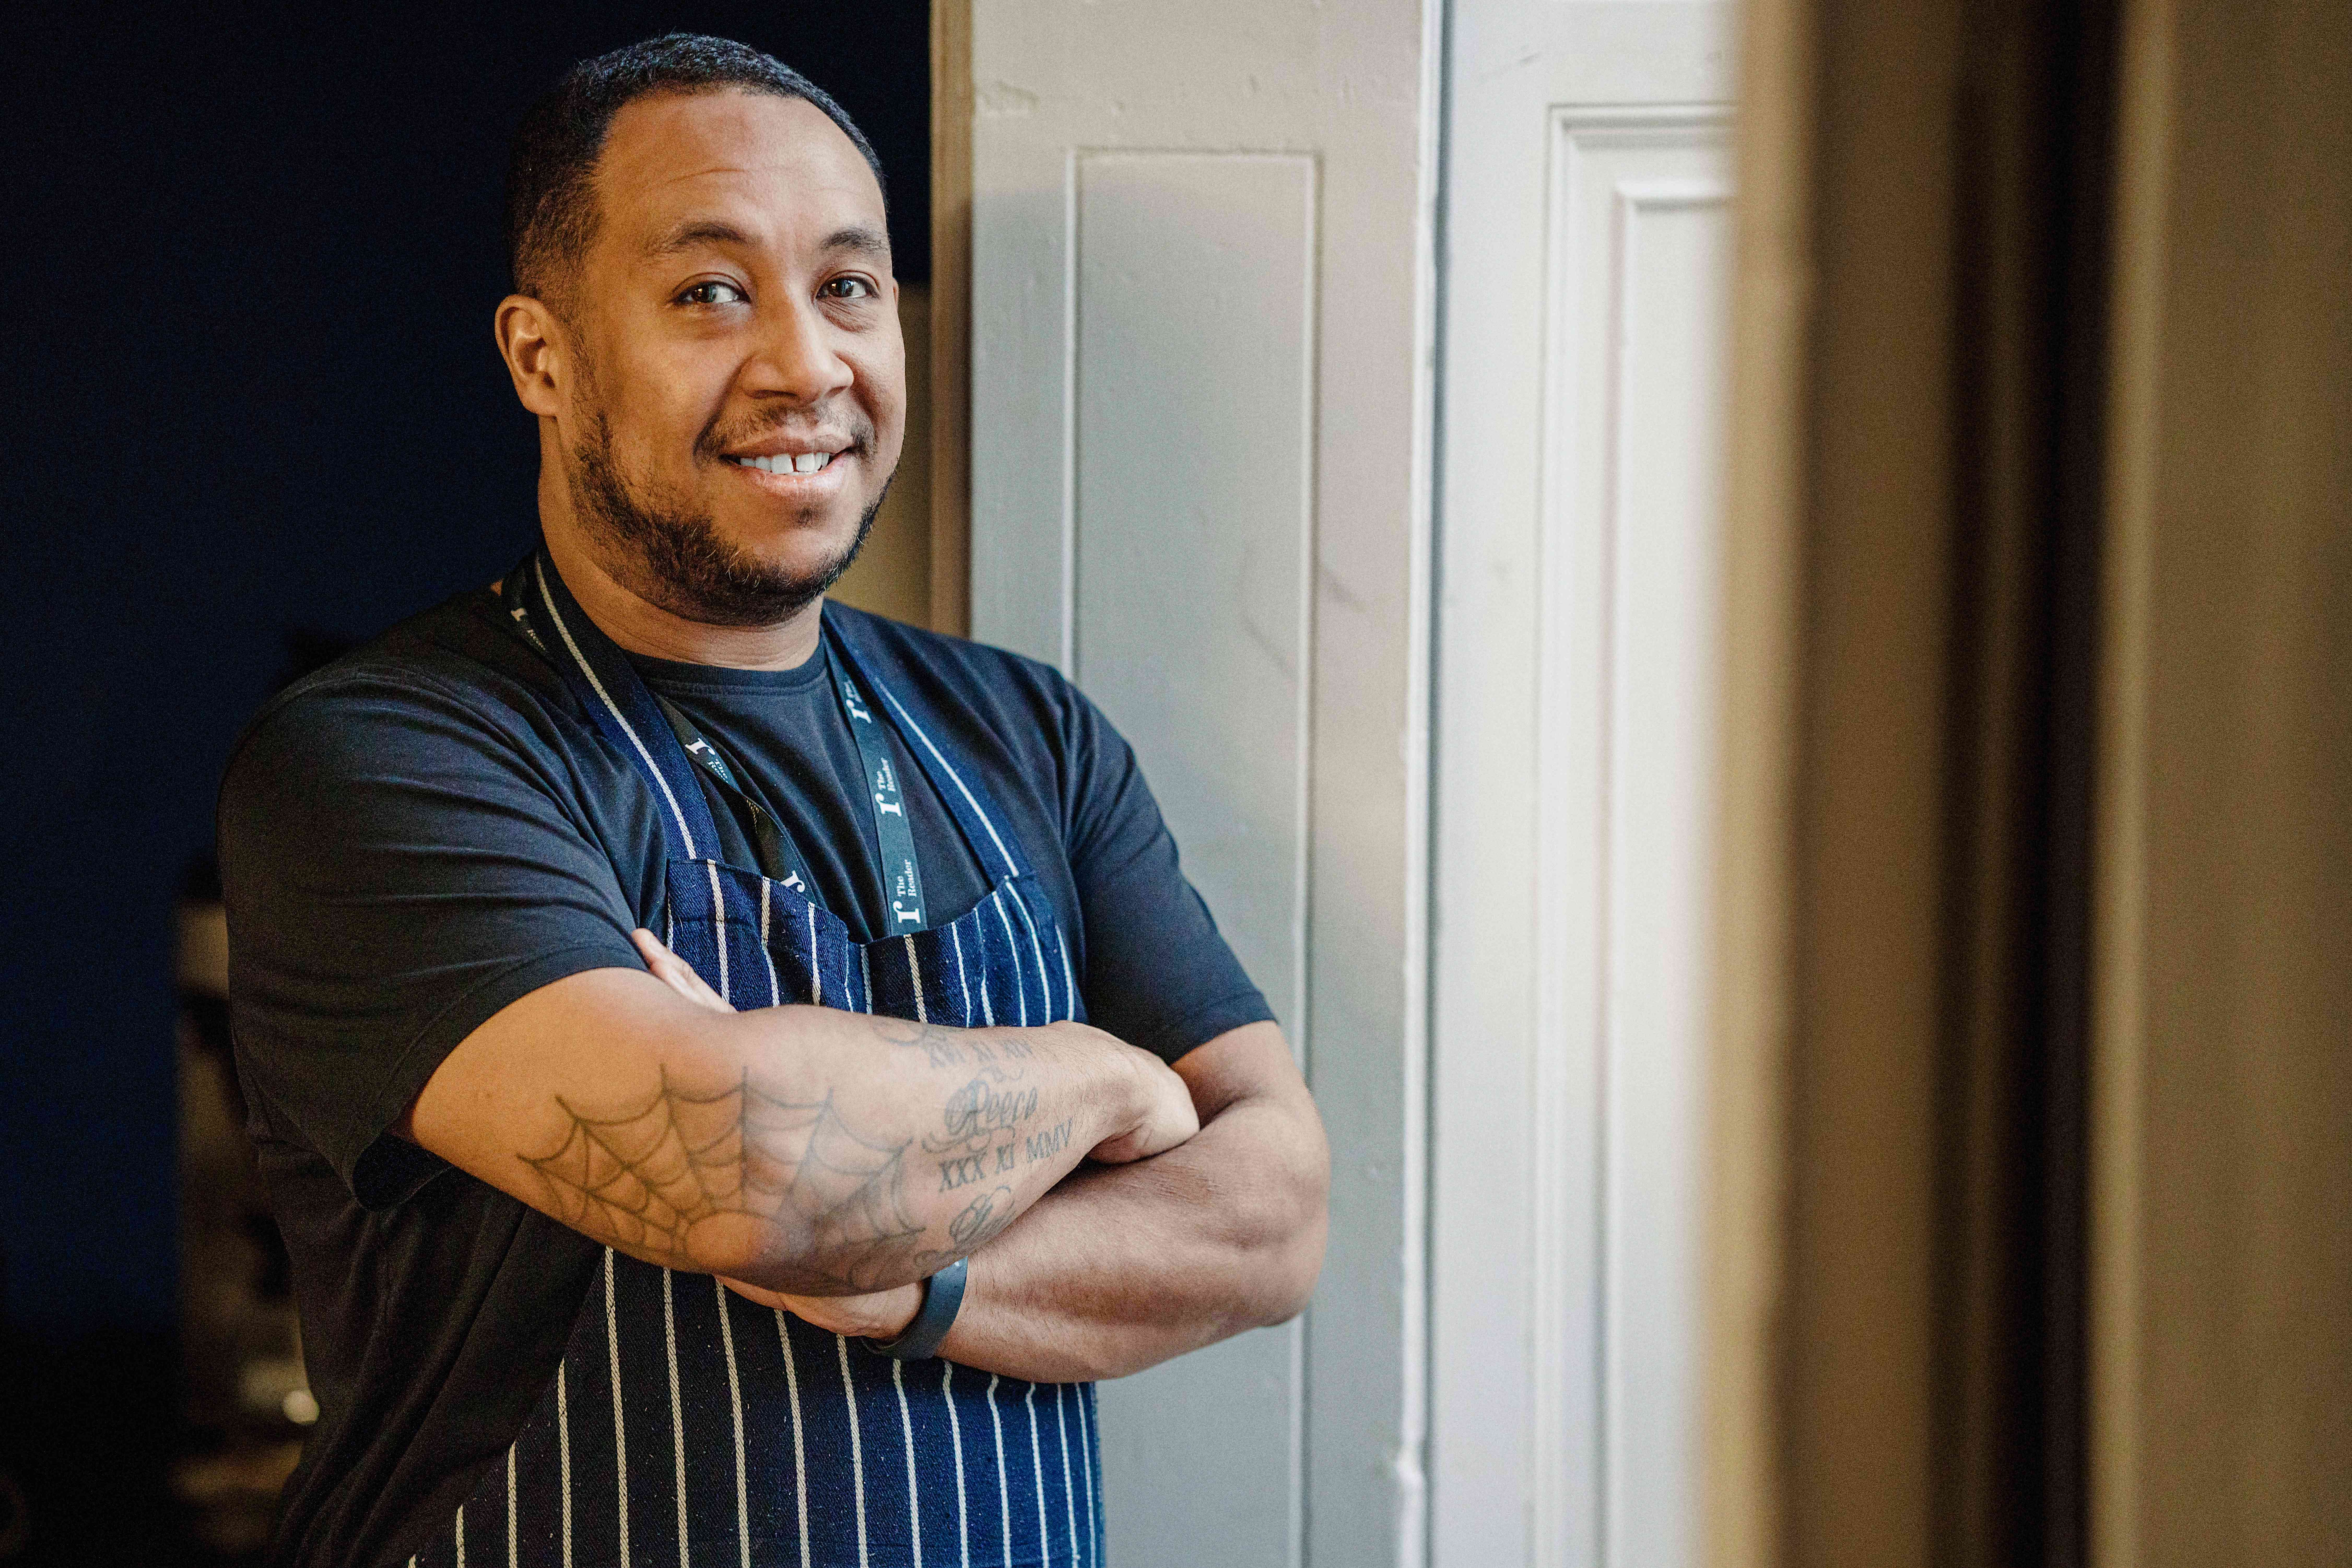 The Reader's head chef Jeff Gardner leans against a window frame and smiles at the camera